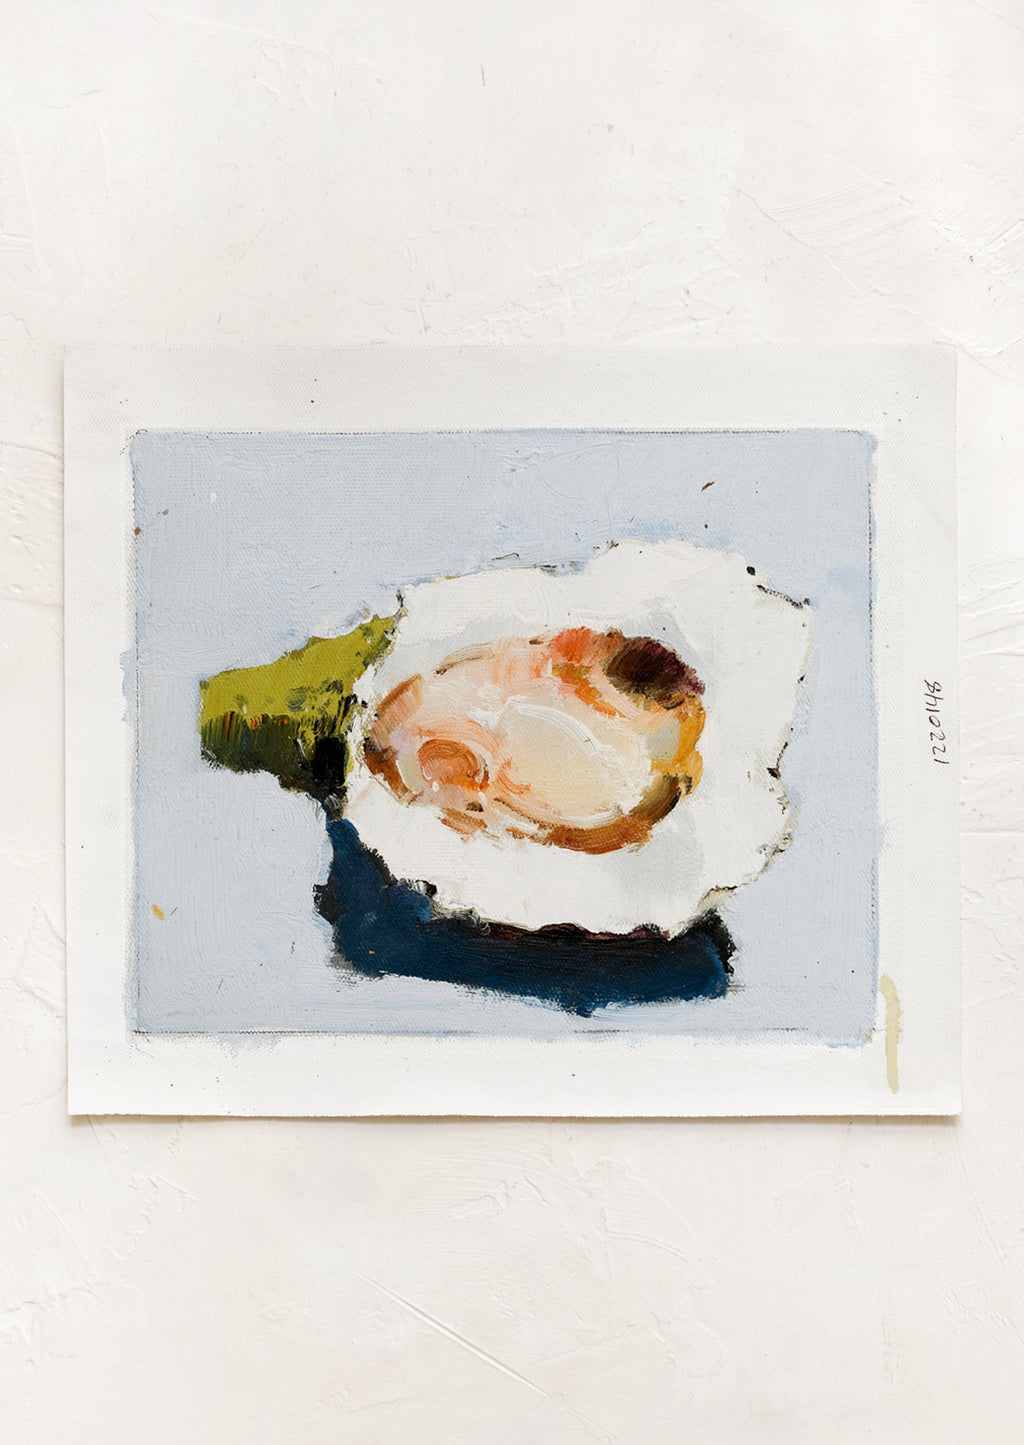 1: An original oil painting of oyster still life on light blue background.